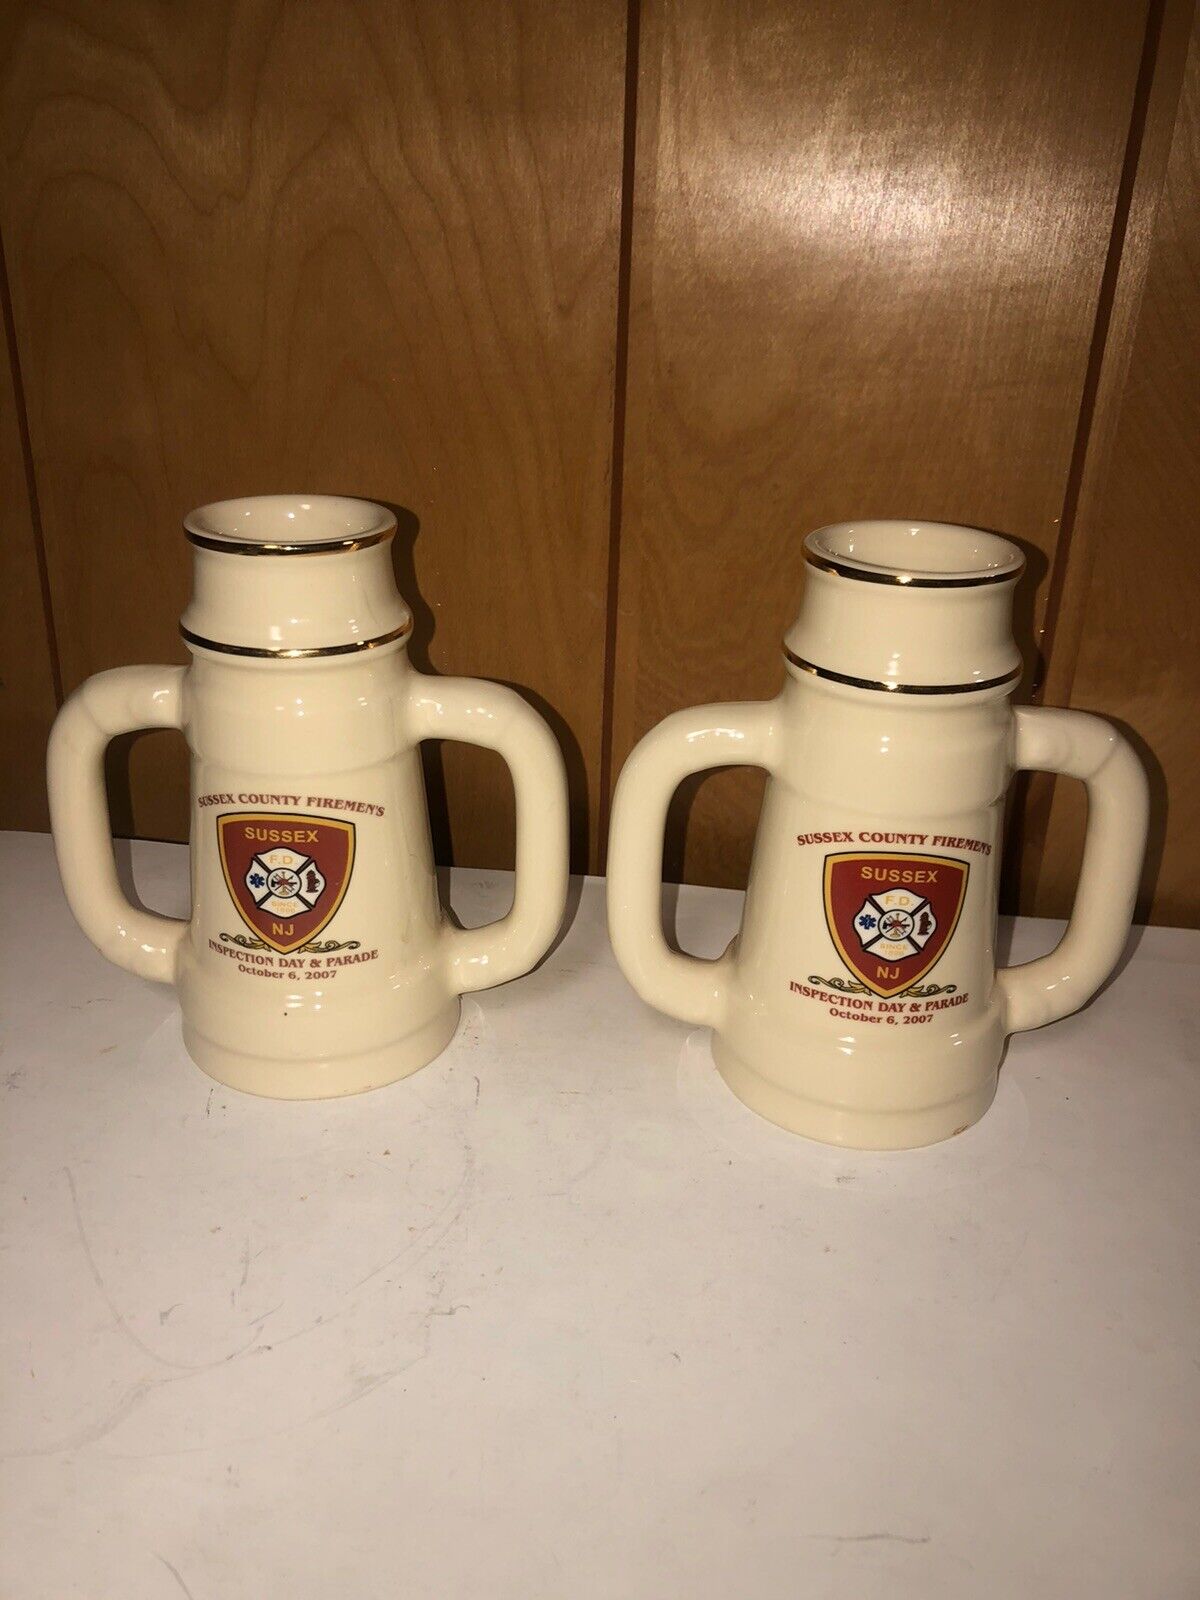 Sussex County NJ Firemen’s Inspection Day & Parade Mug